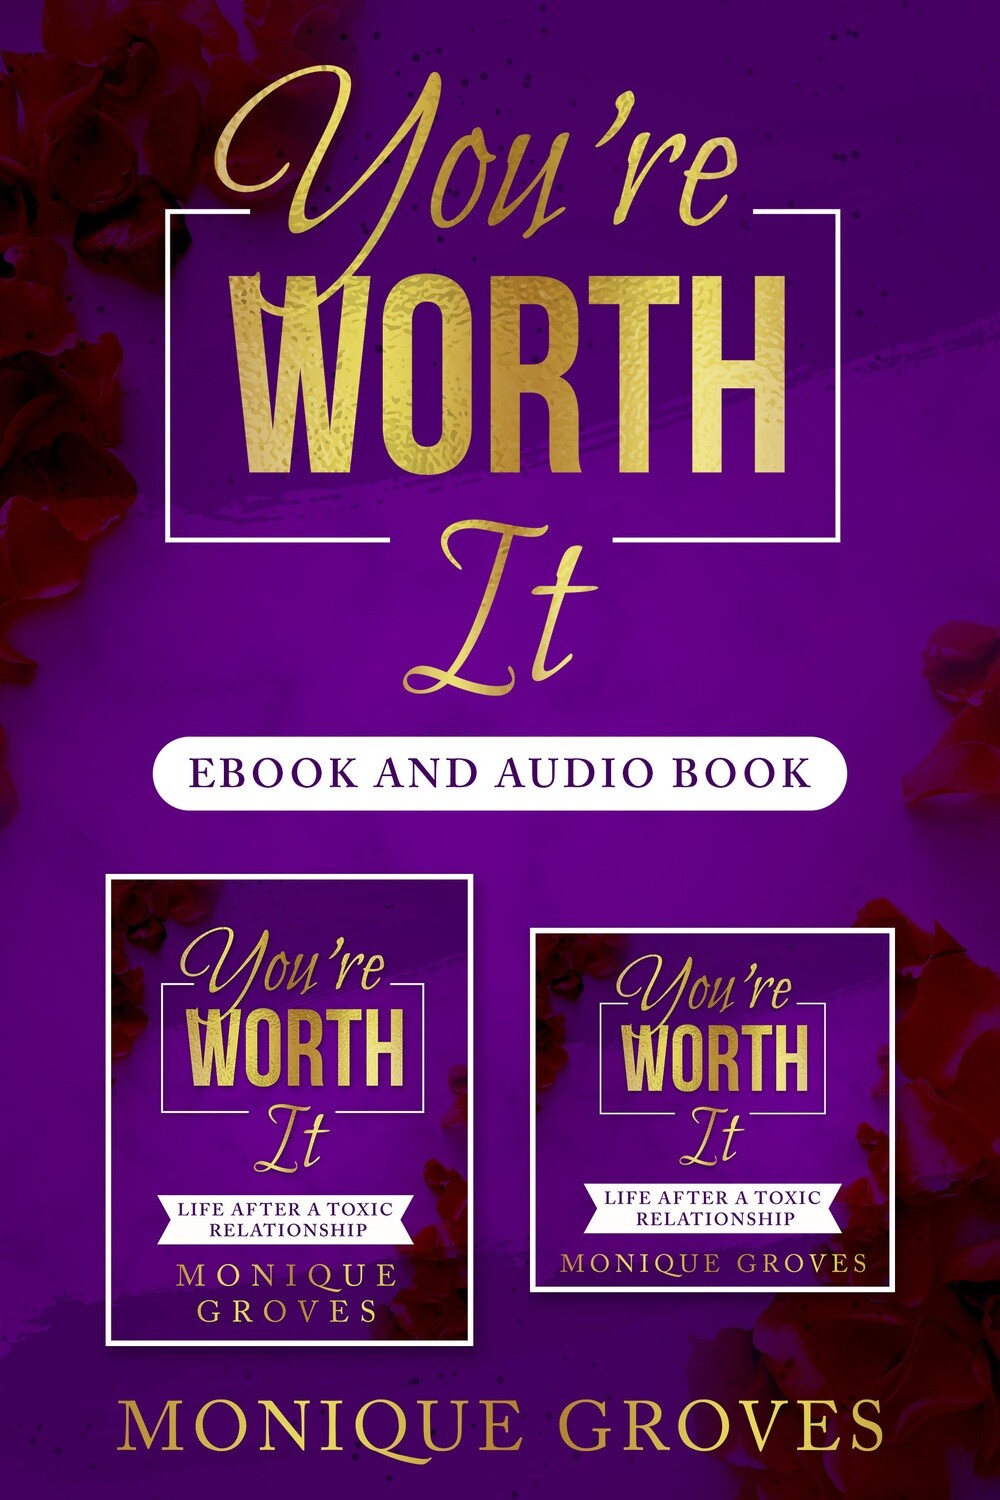 Book Bundle: You're Worth It